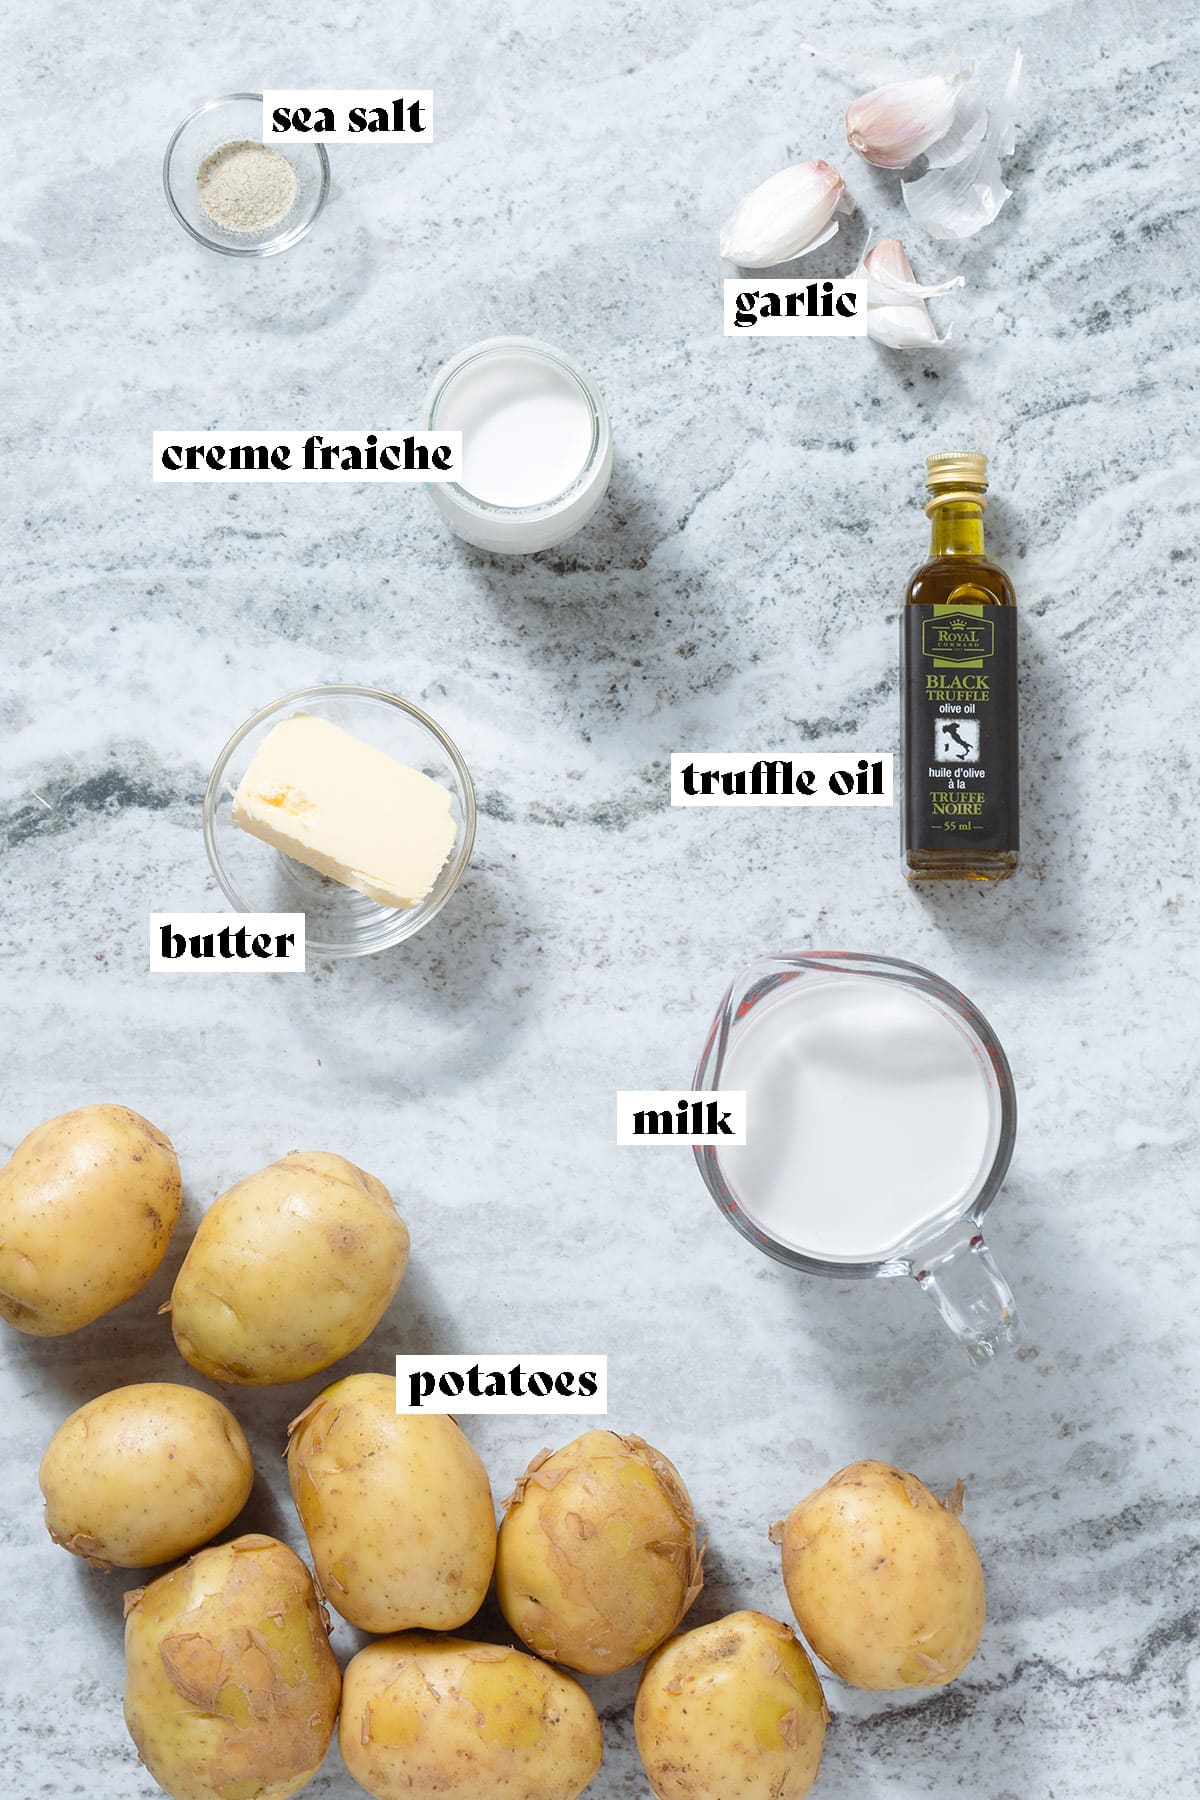 Potatoes, milk, truffle oil, butter, and other ingredients laid out on a grey stone background with text overlay.